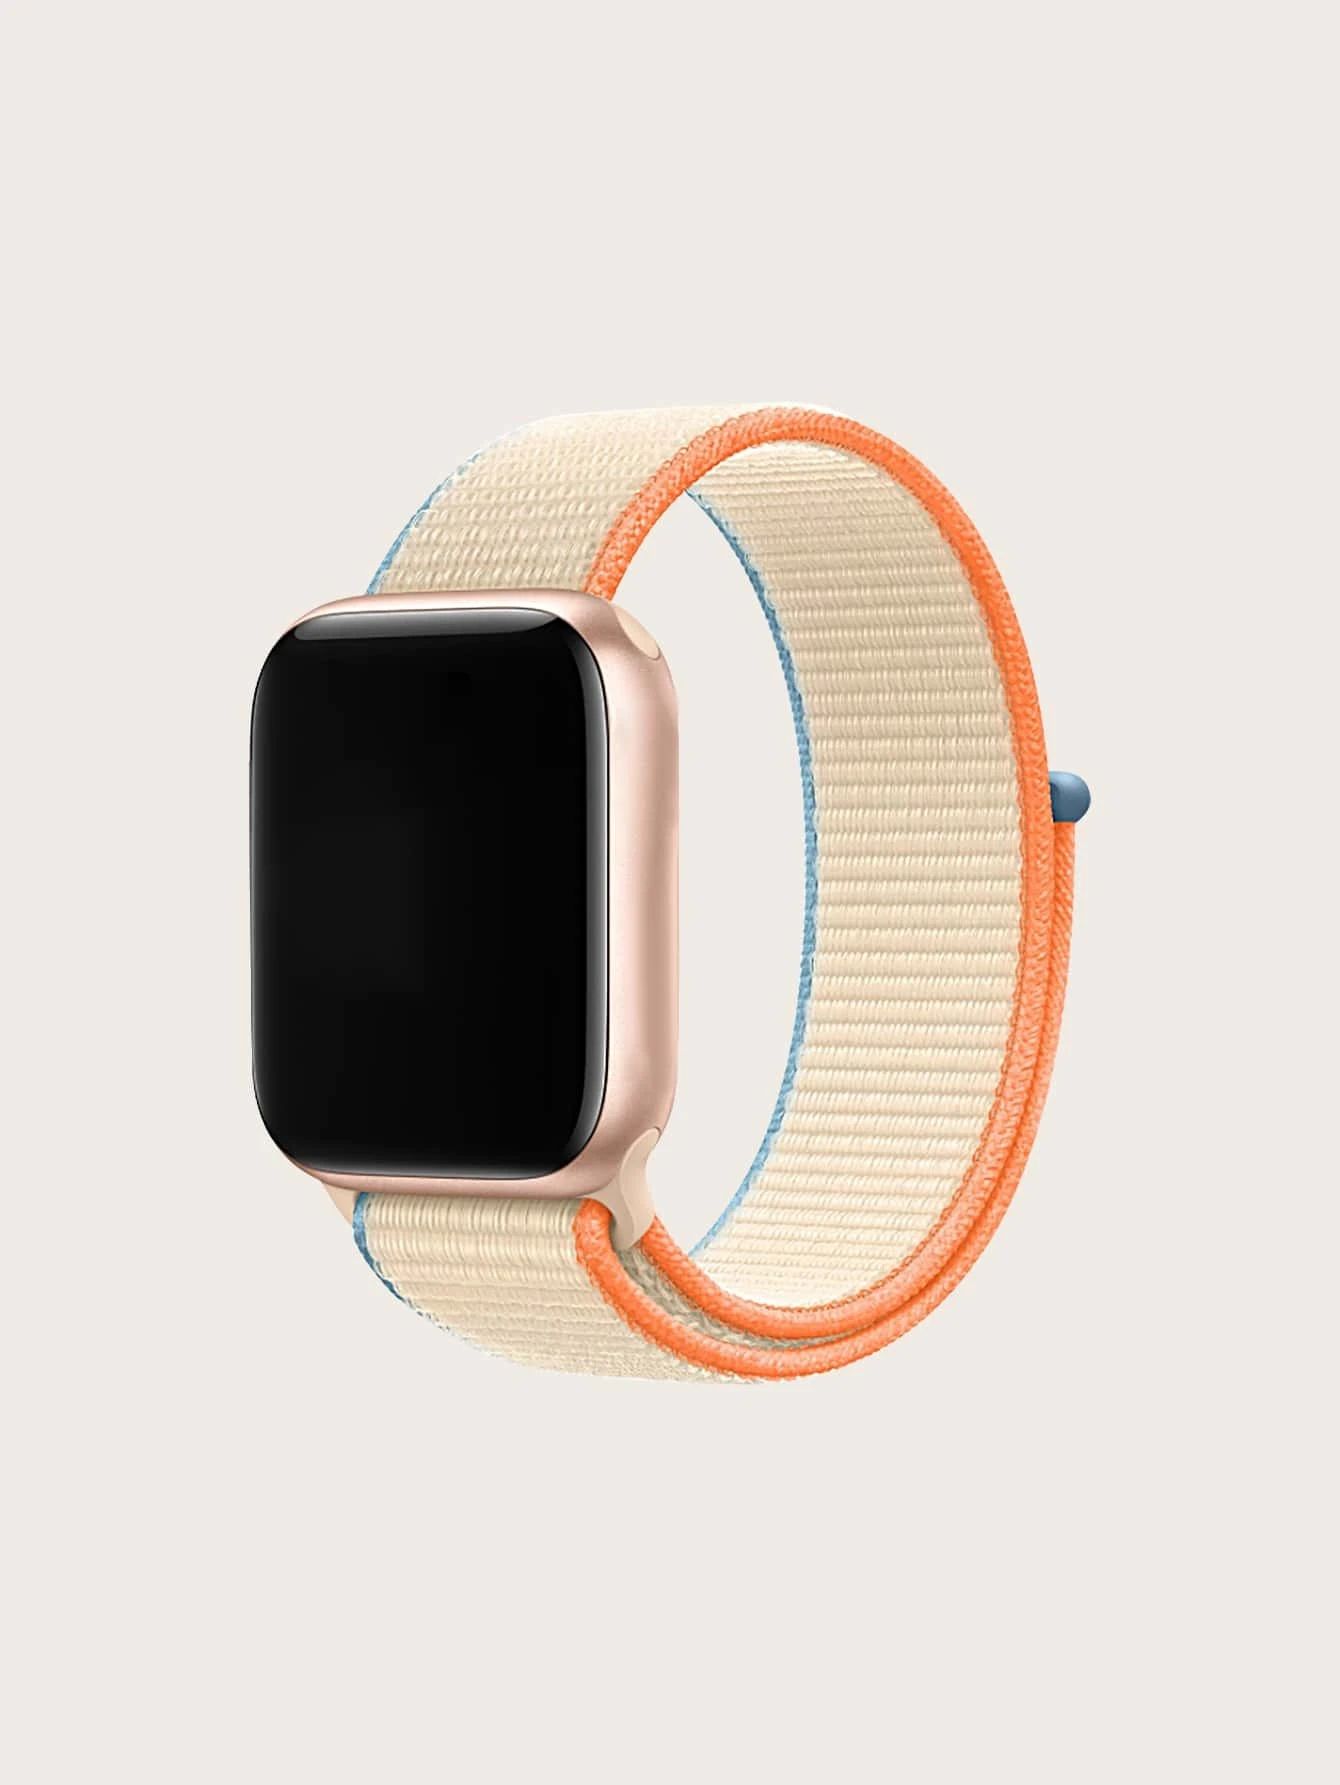 Contrast Binding Nylon Watchband Compatible With Apple Watch | SHEIN